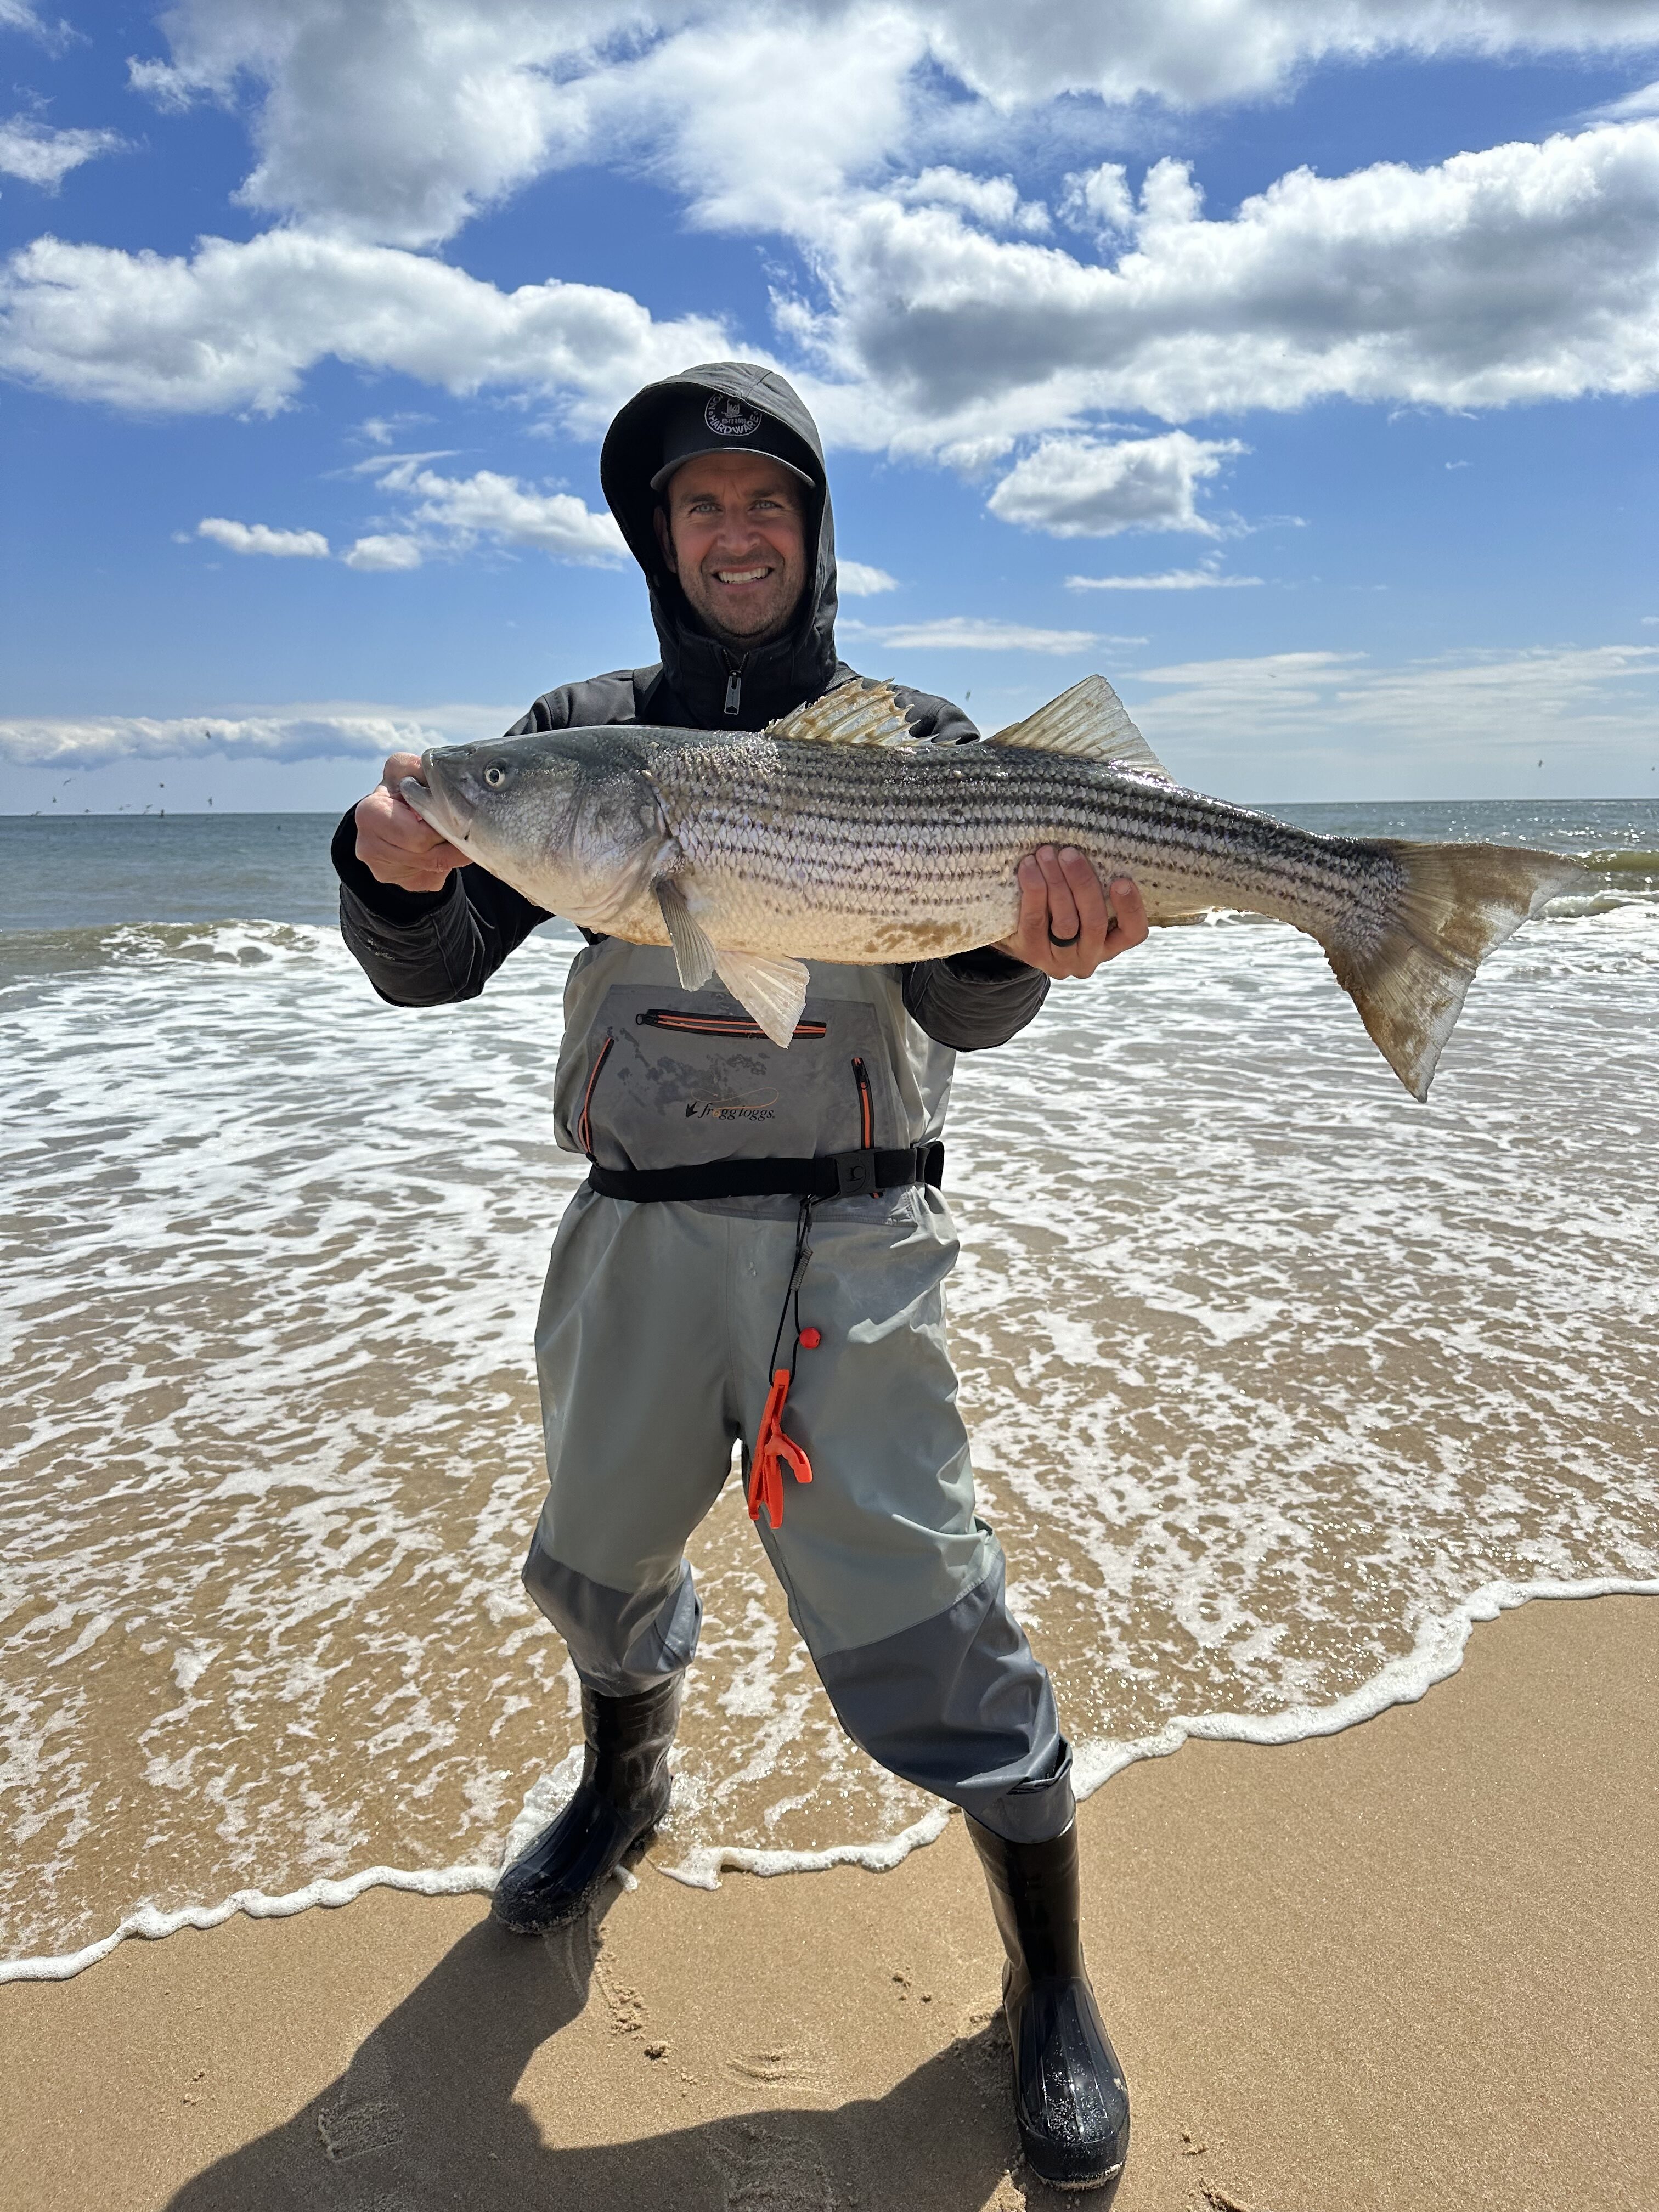 Jason Poremba with a nice striped bass caught from the beach this past week.